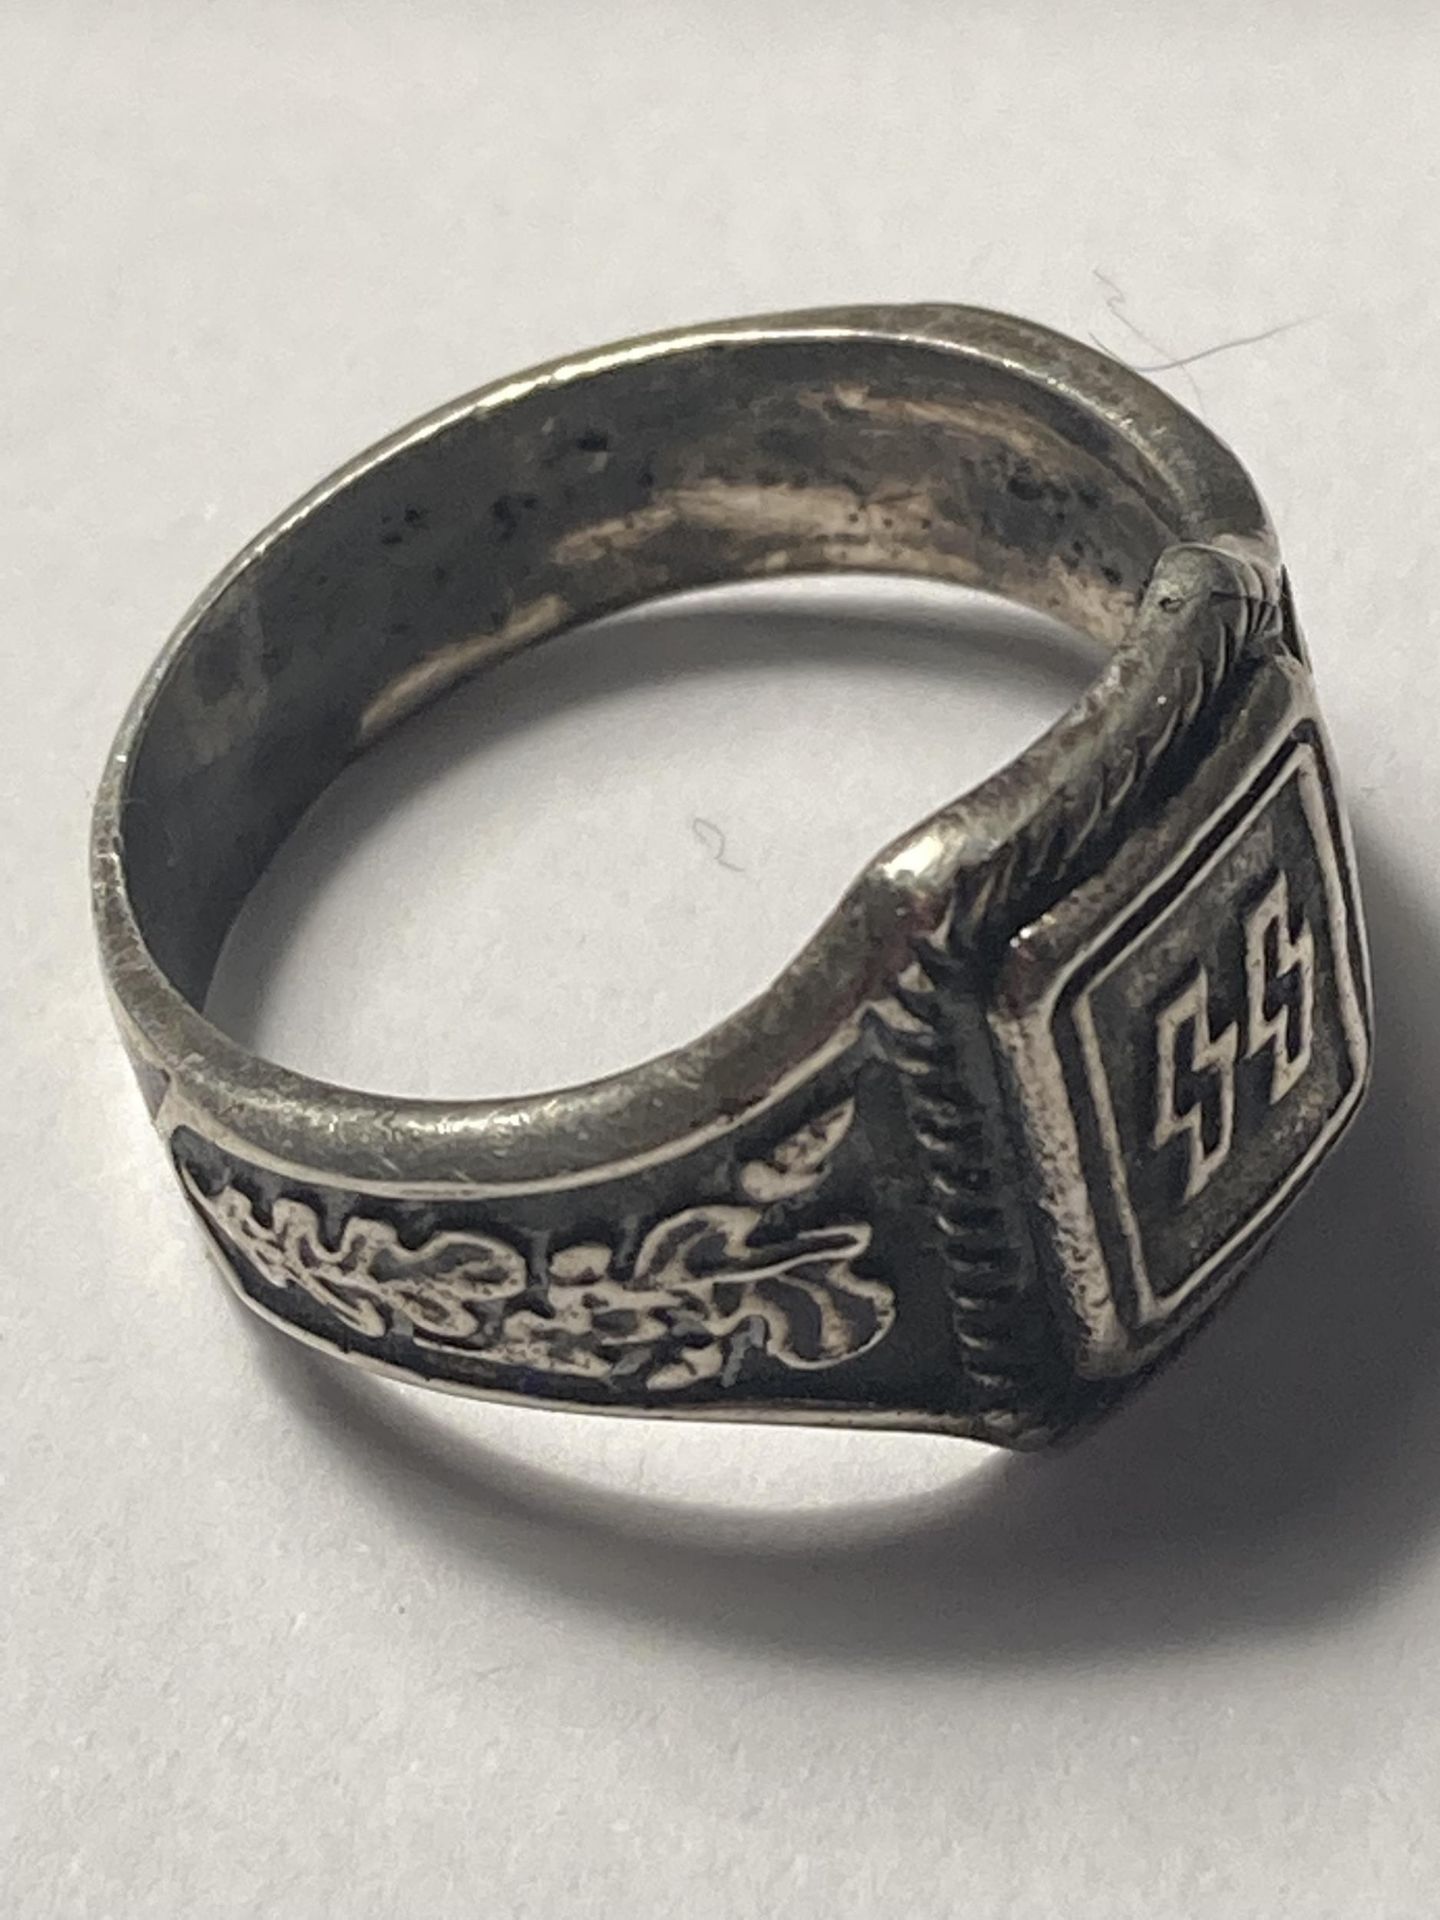 A SILVER GERMAN RING - Image 3 of 3